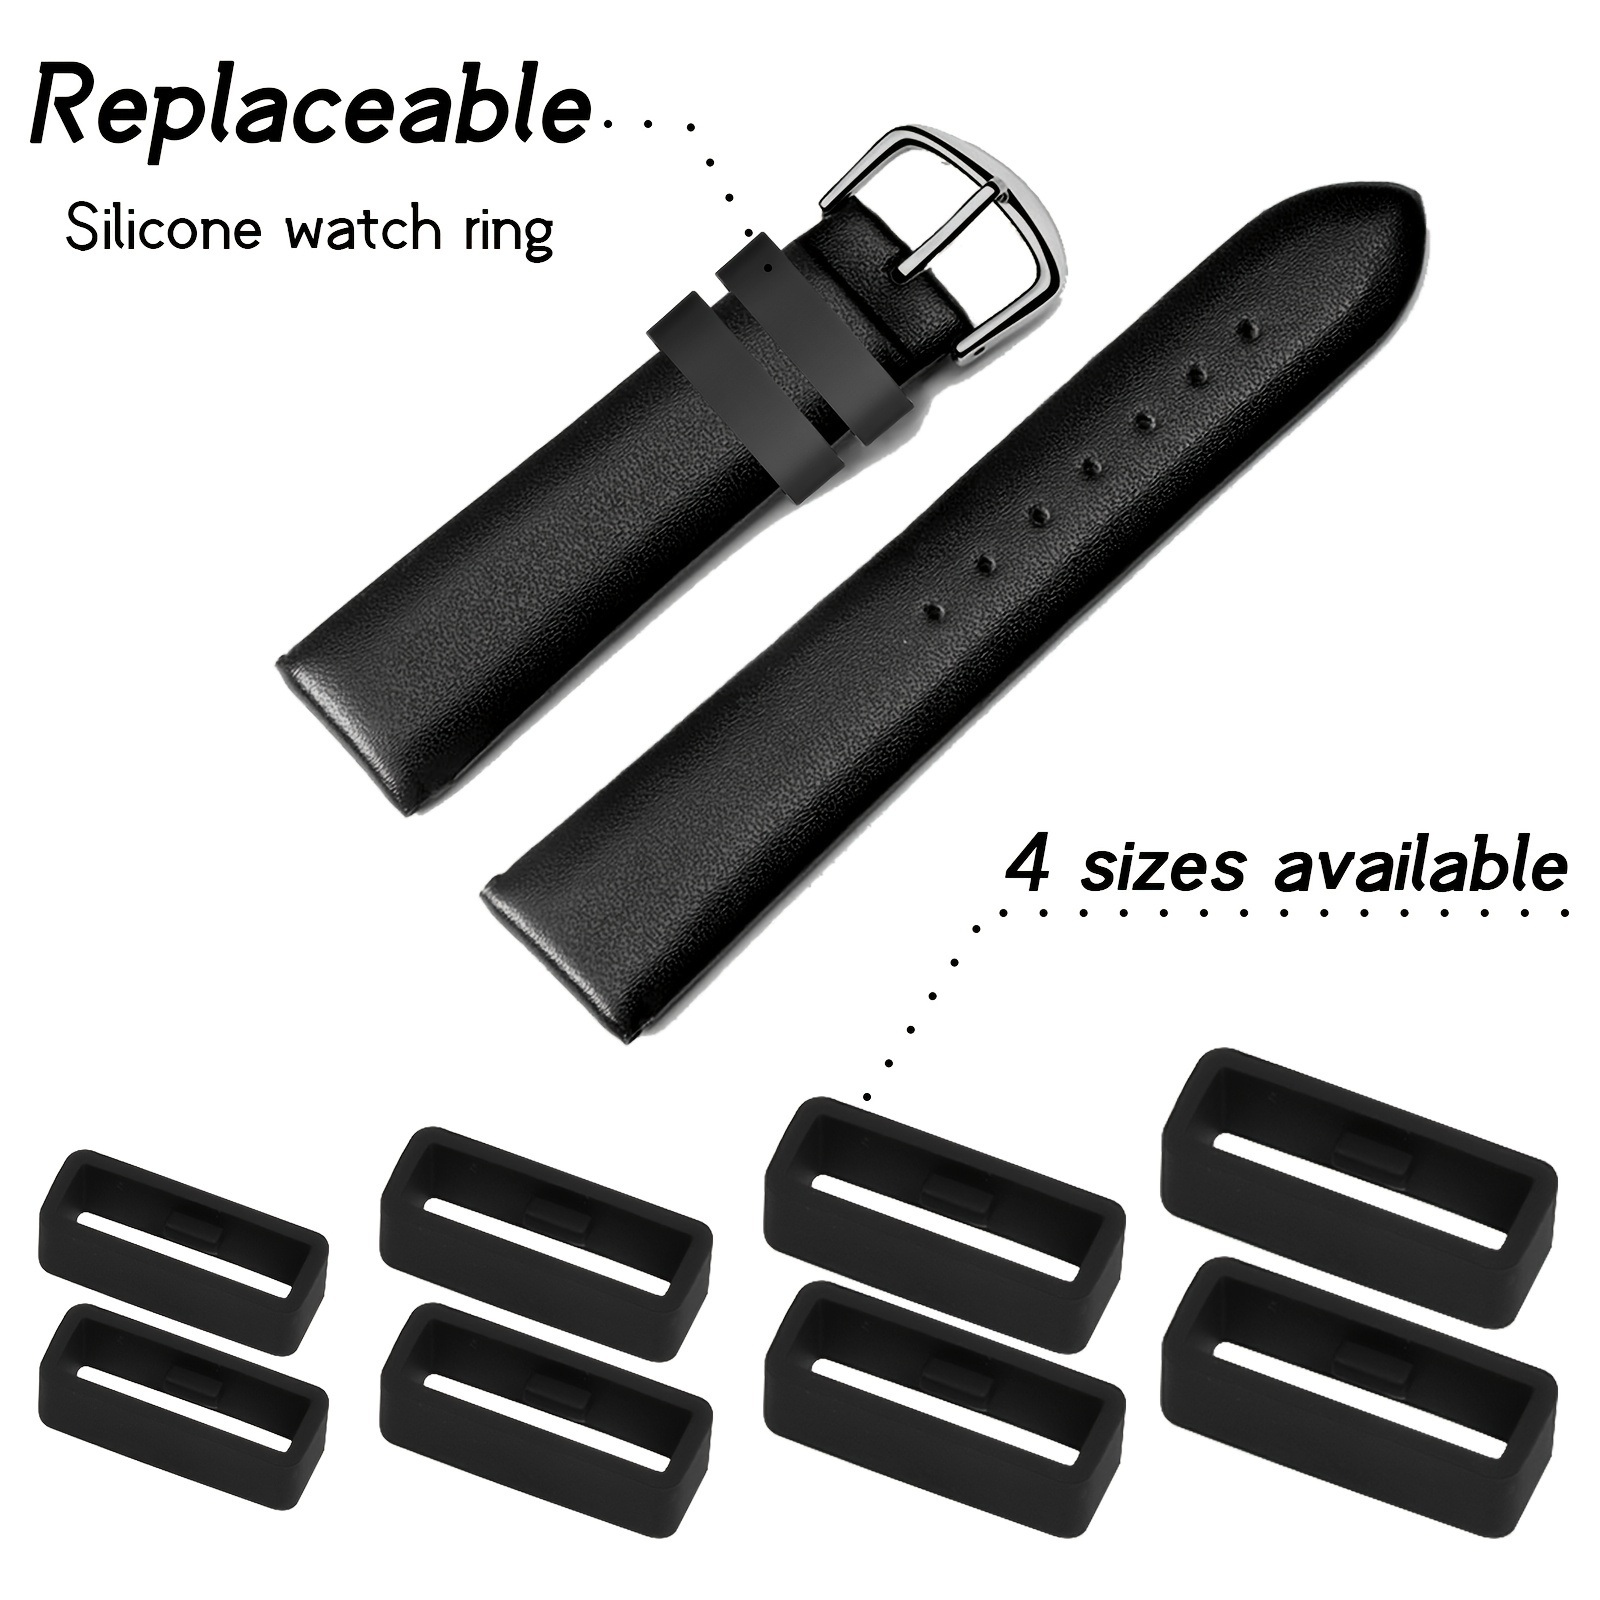 Silicone Strap Keeper or Strap Loop for Silicone Watch Straps (16